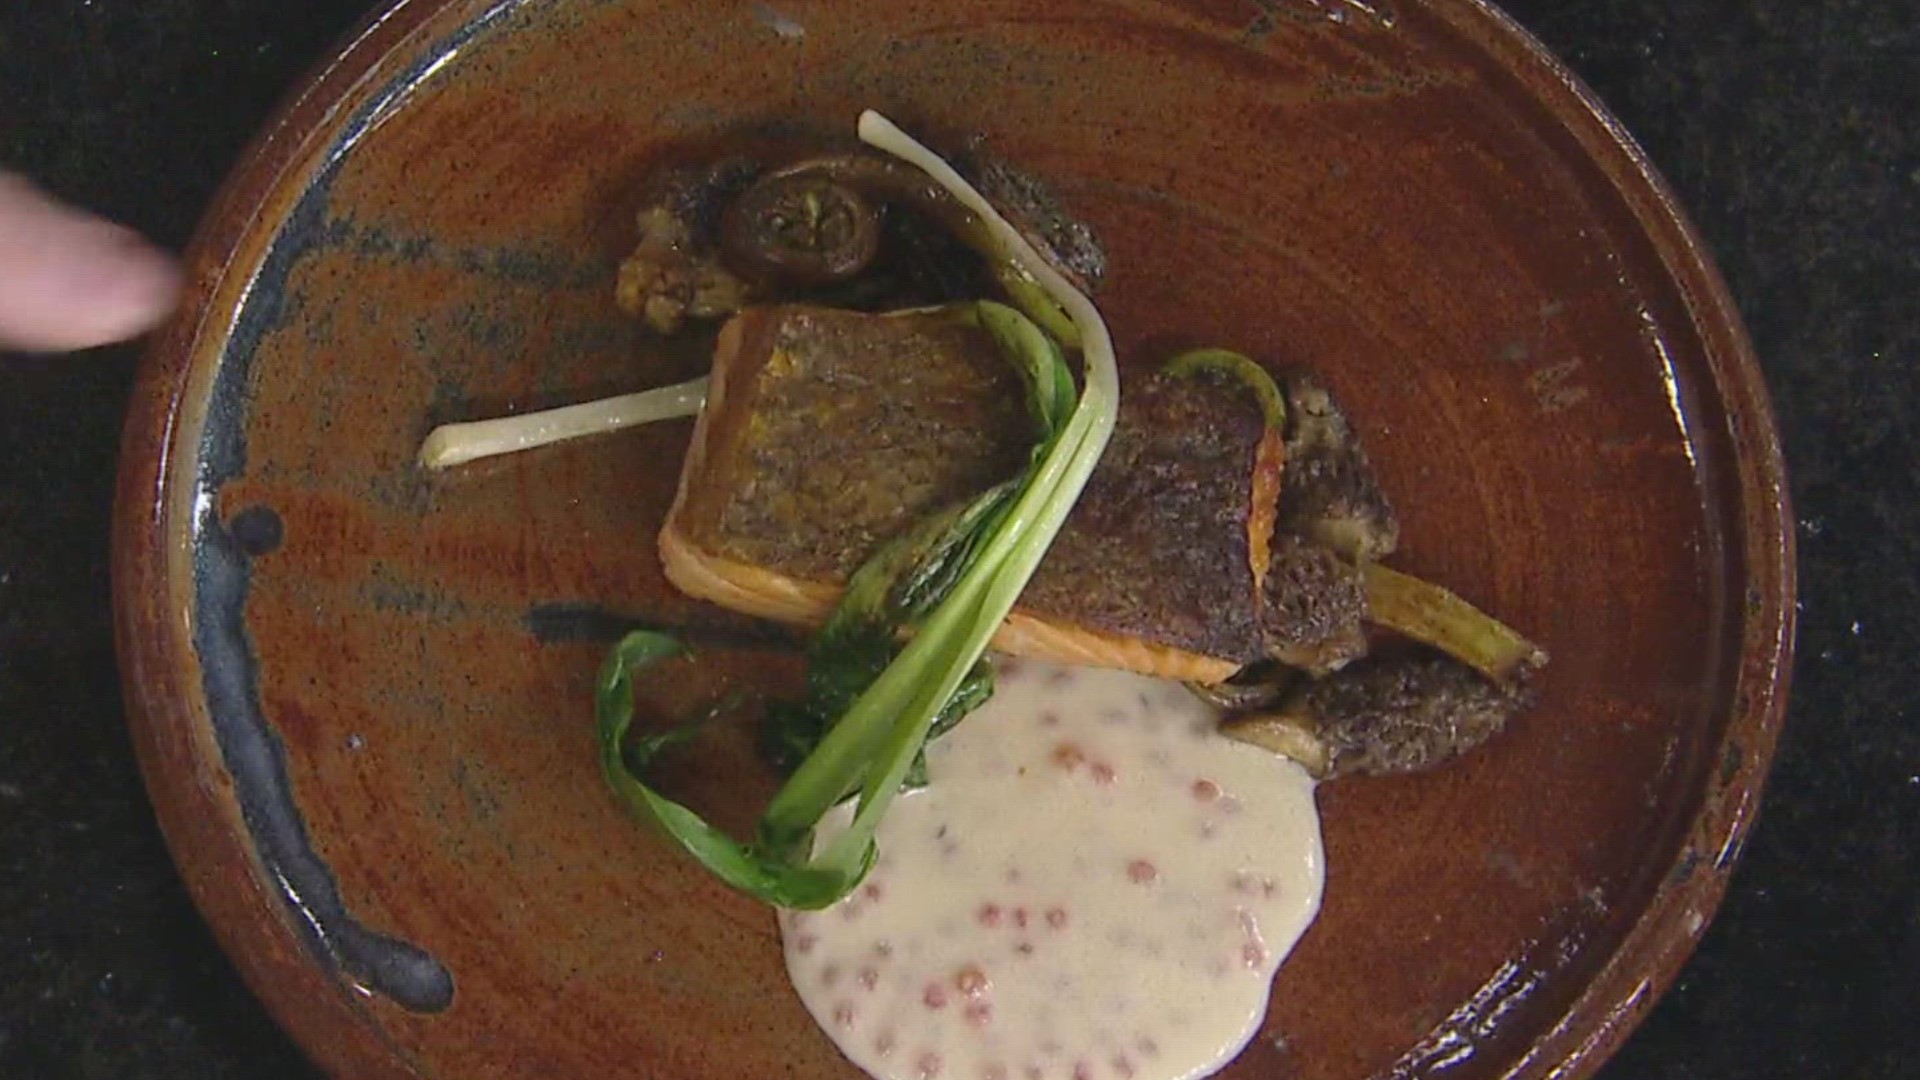 Chef Marque Collins joined KARE 11 Saturday with a Norwegian salmon dish with fiddlehead ferns, morels, ramps, smoked trout roe and aquavit beurre blanc.